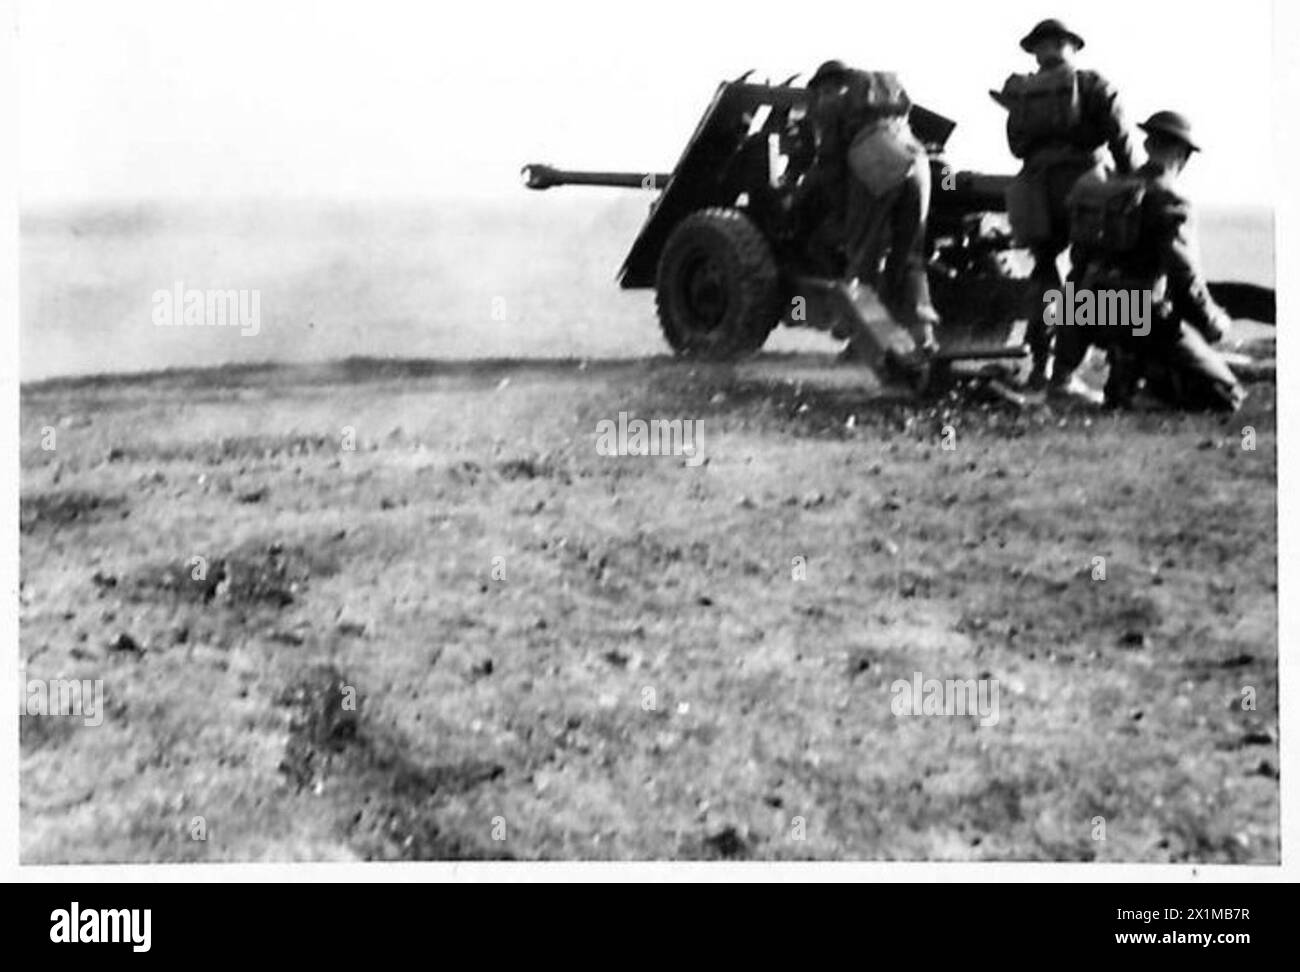 DEMONSTRATION OF 17-POUNDER GUN TO FACTORY WORKERS - The 17-pounder gun firing at a moving tank on the range, British Army Stock Photo